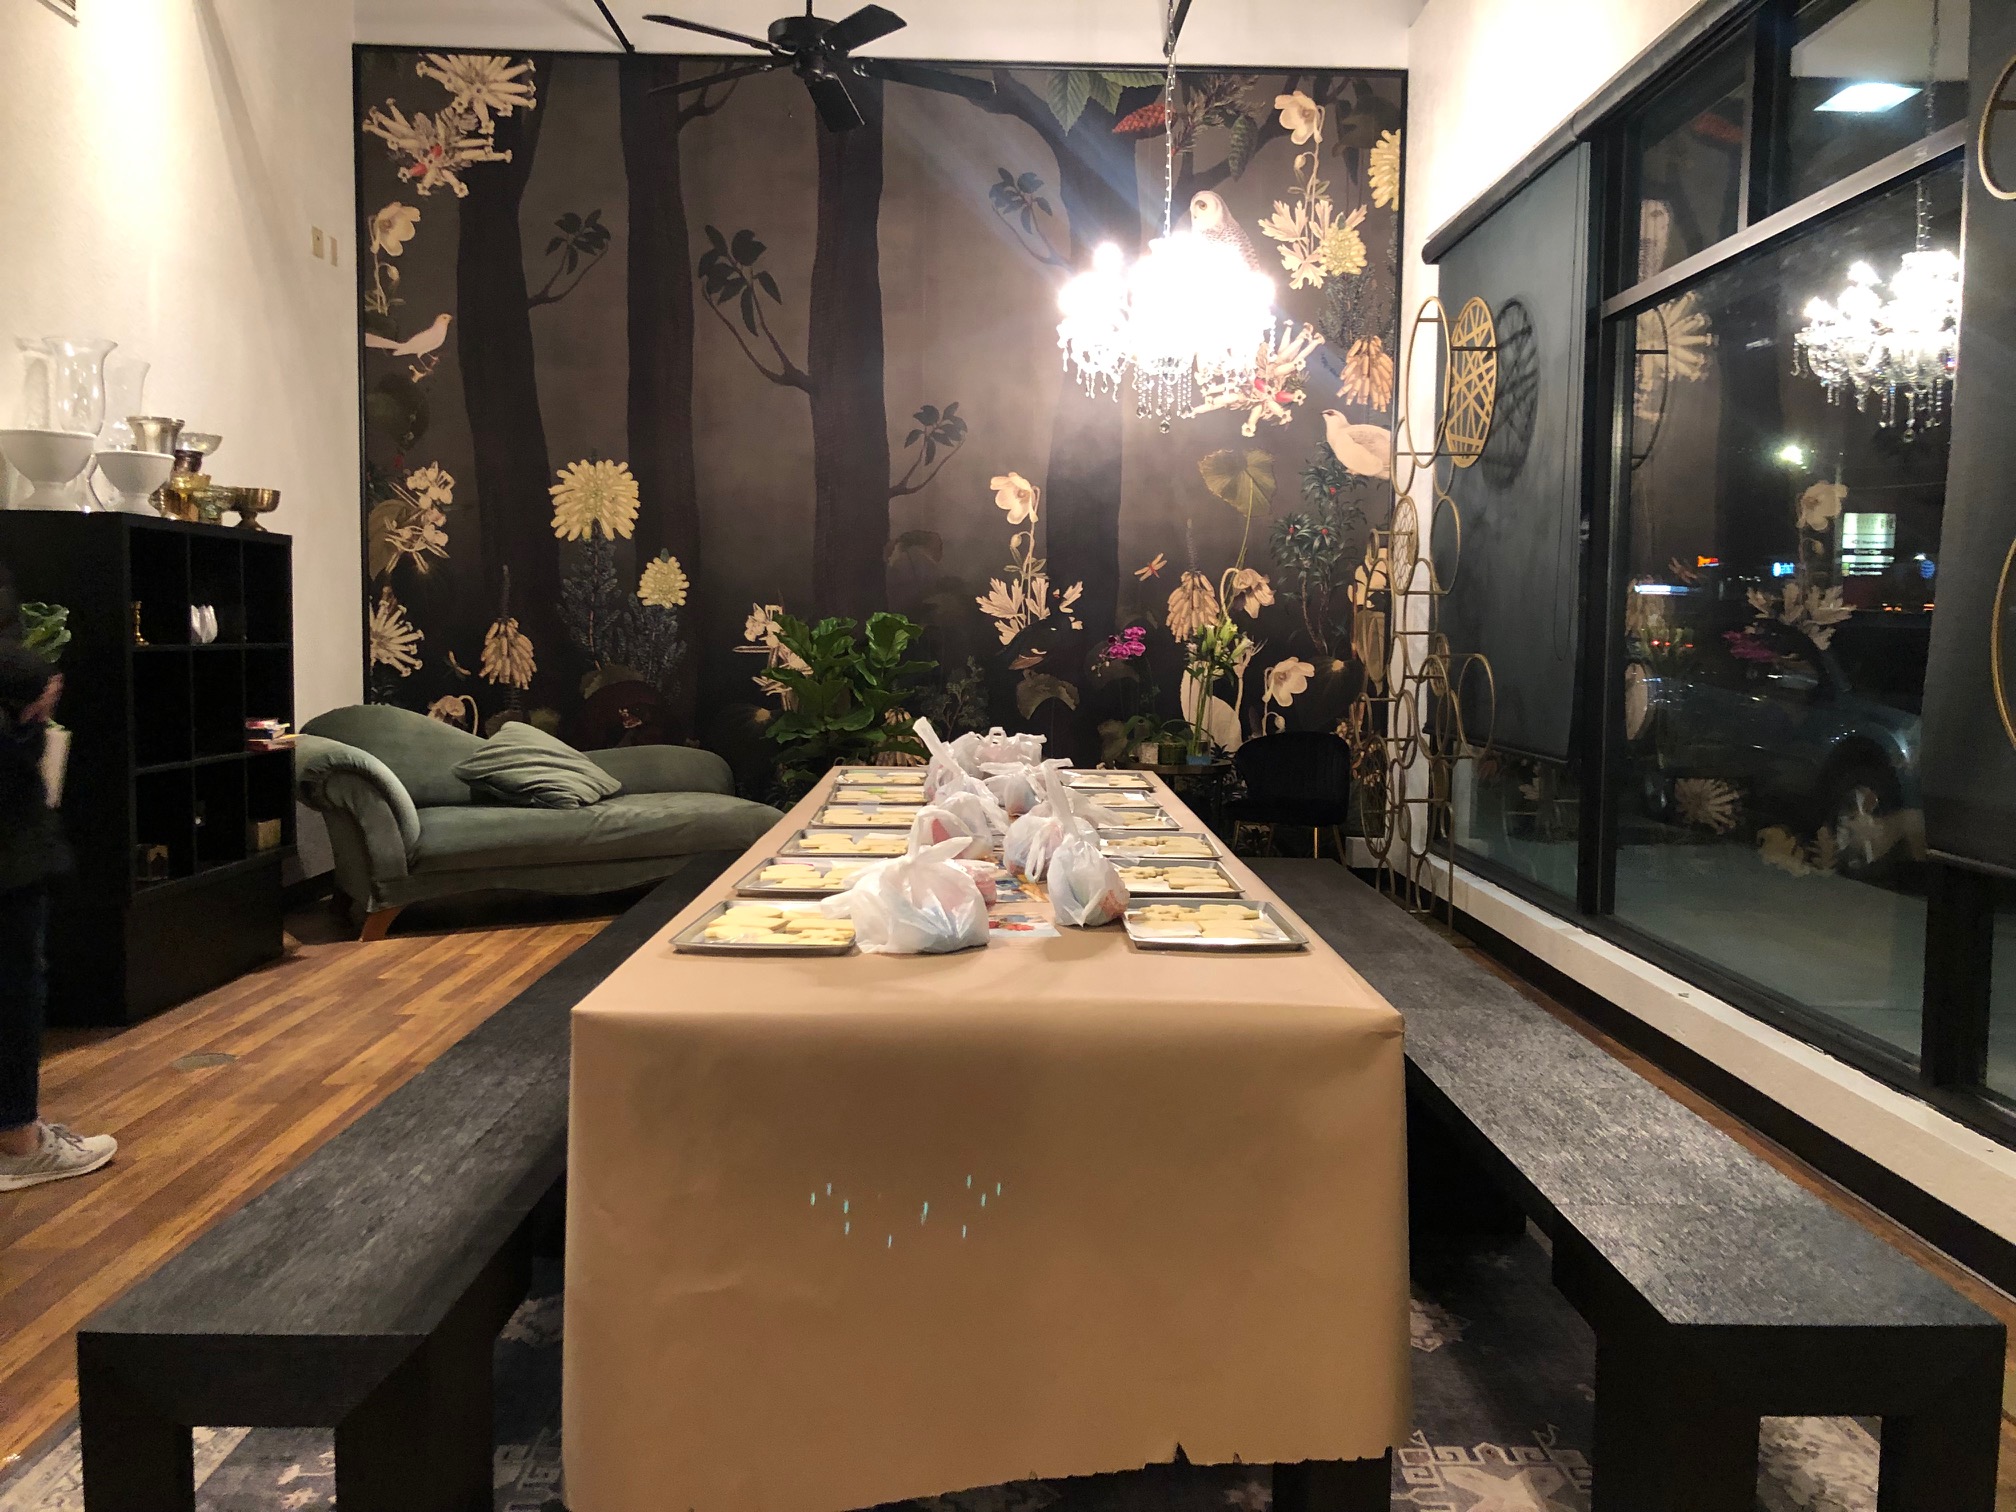 Two long black benches are pulled up to a long table with a brown craft paper table cover. There is a feature wall behind that is black with flowers. Photo by Alyssa Buckley.